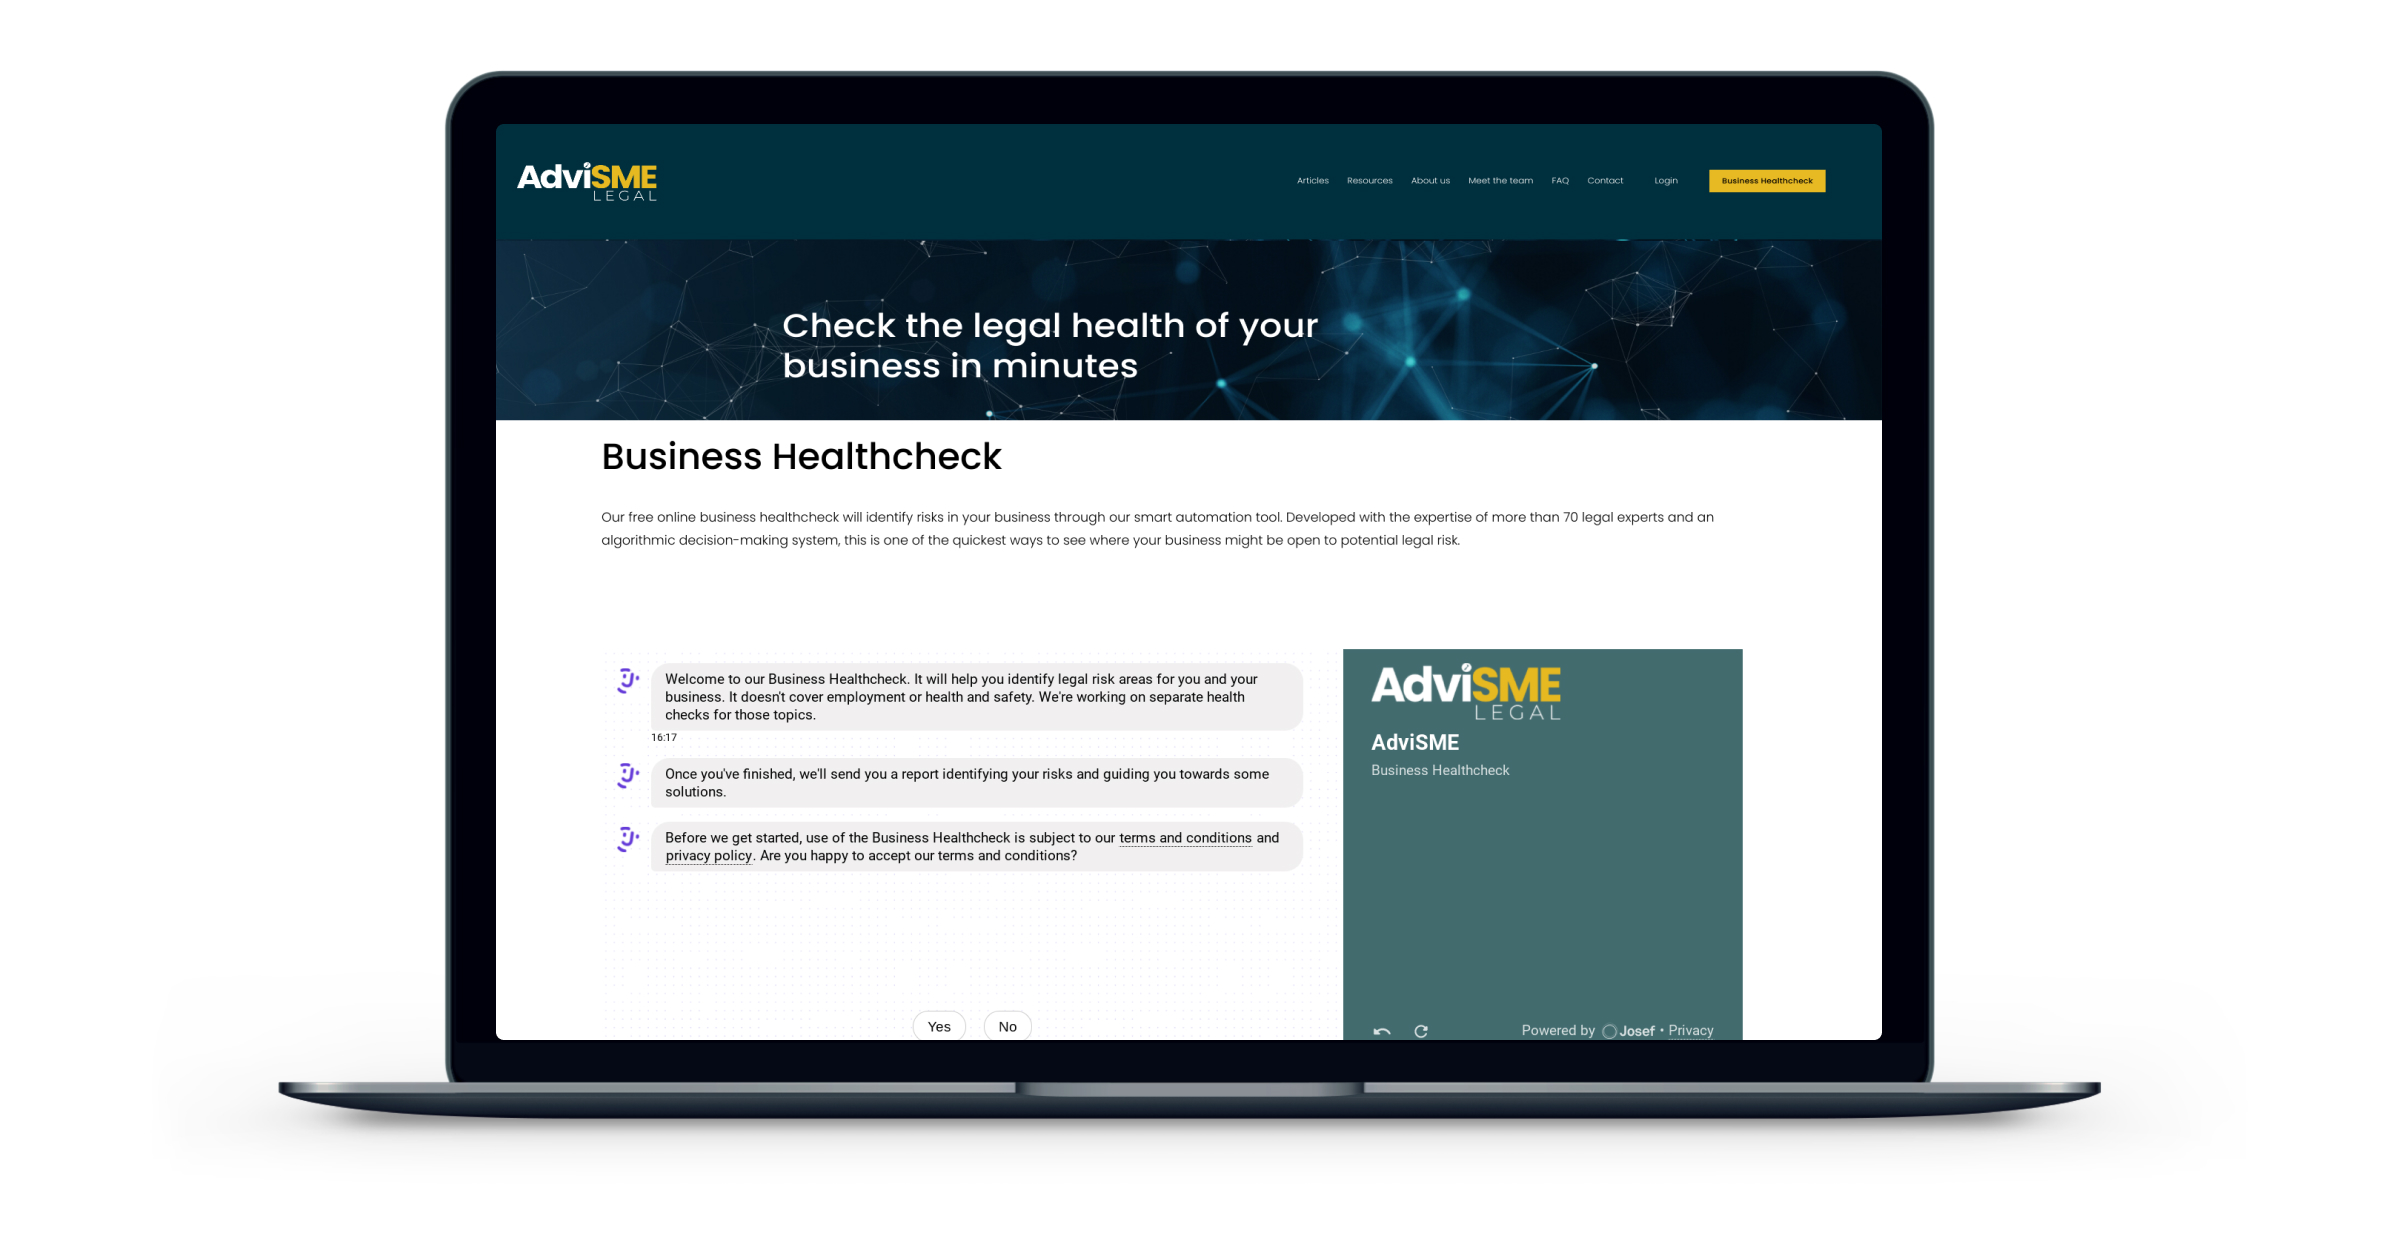 The AdviSME bot gives business owners a legal health check in the time it takes for a coffee break